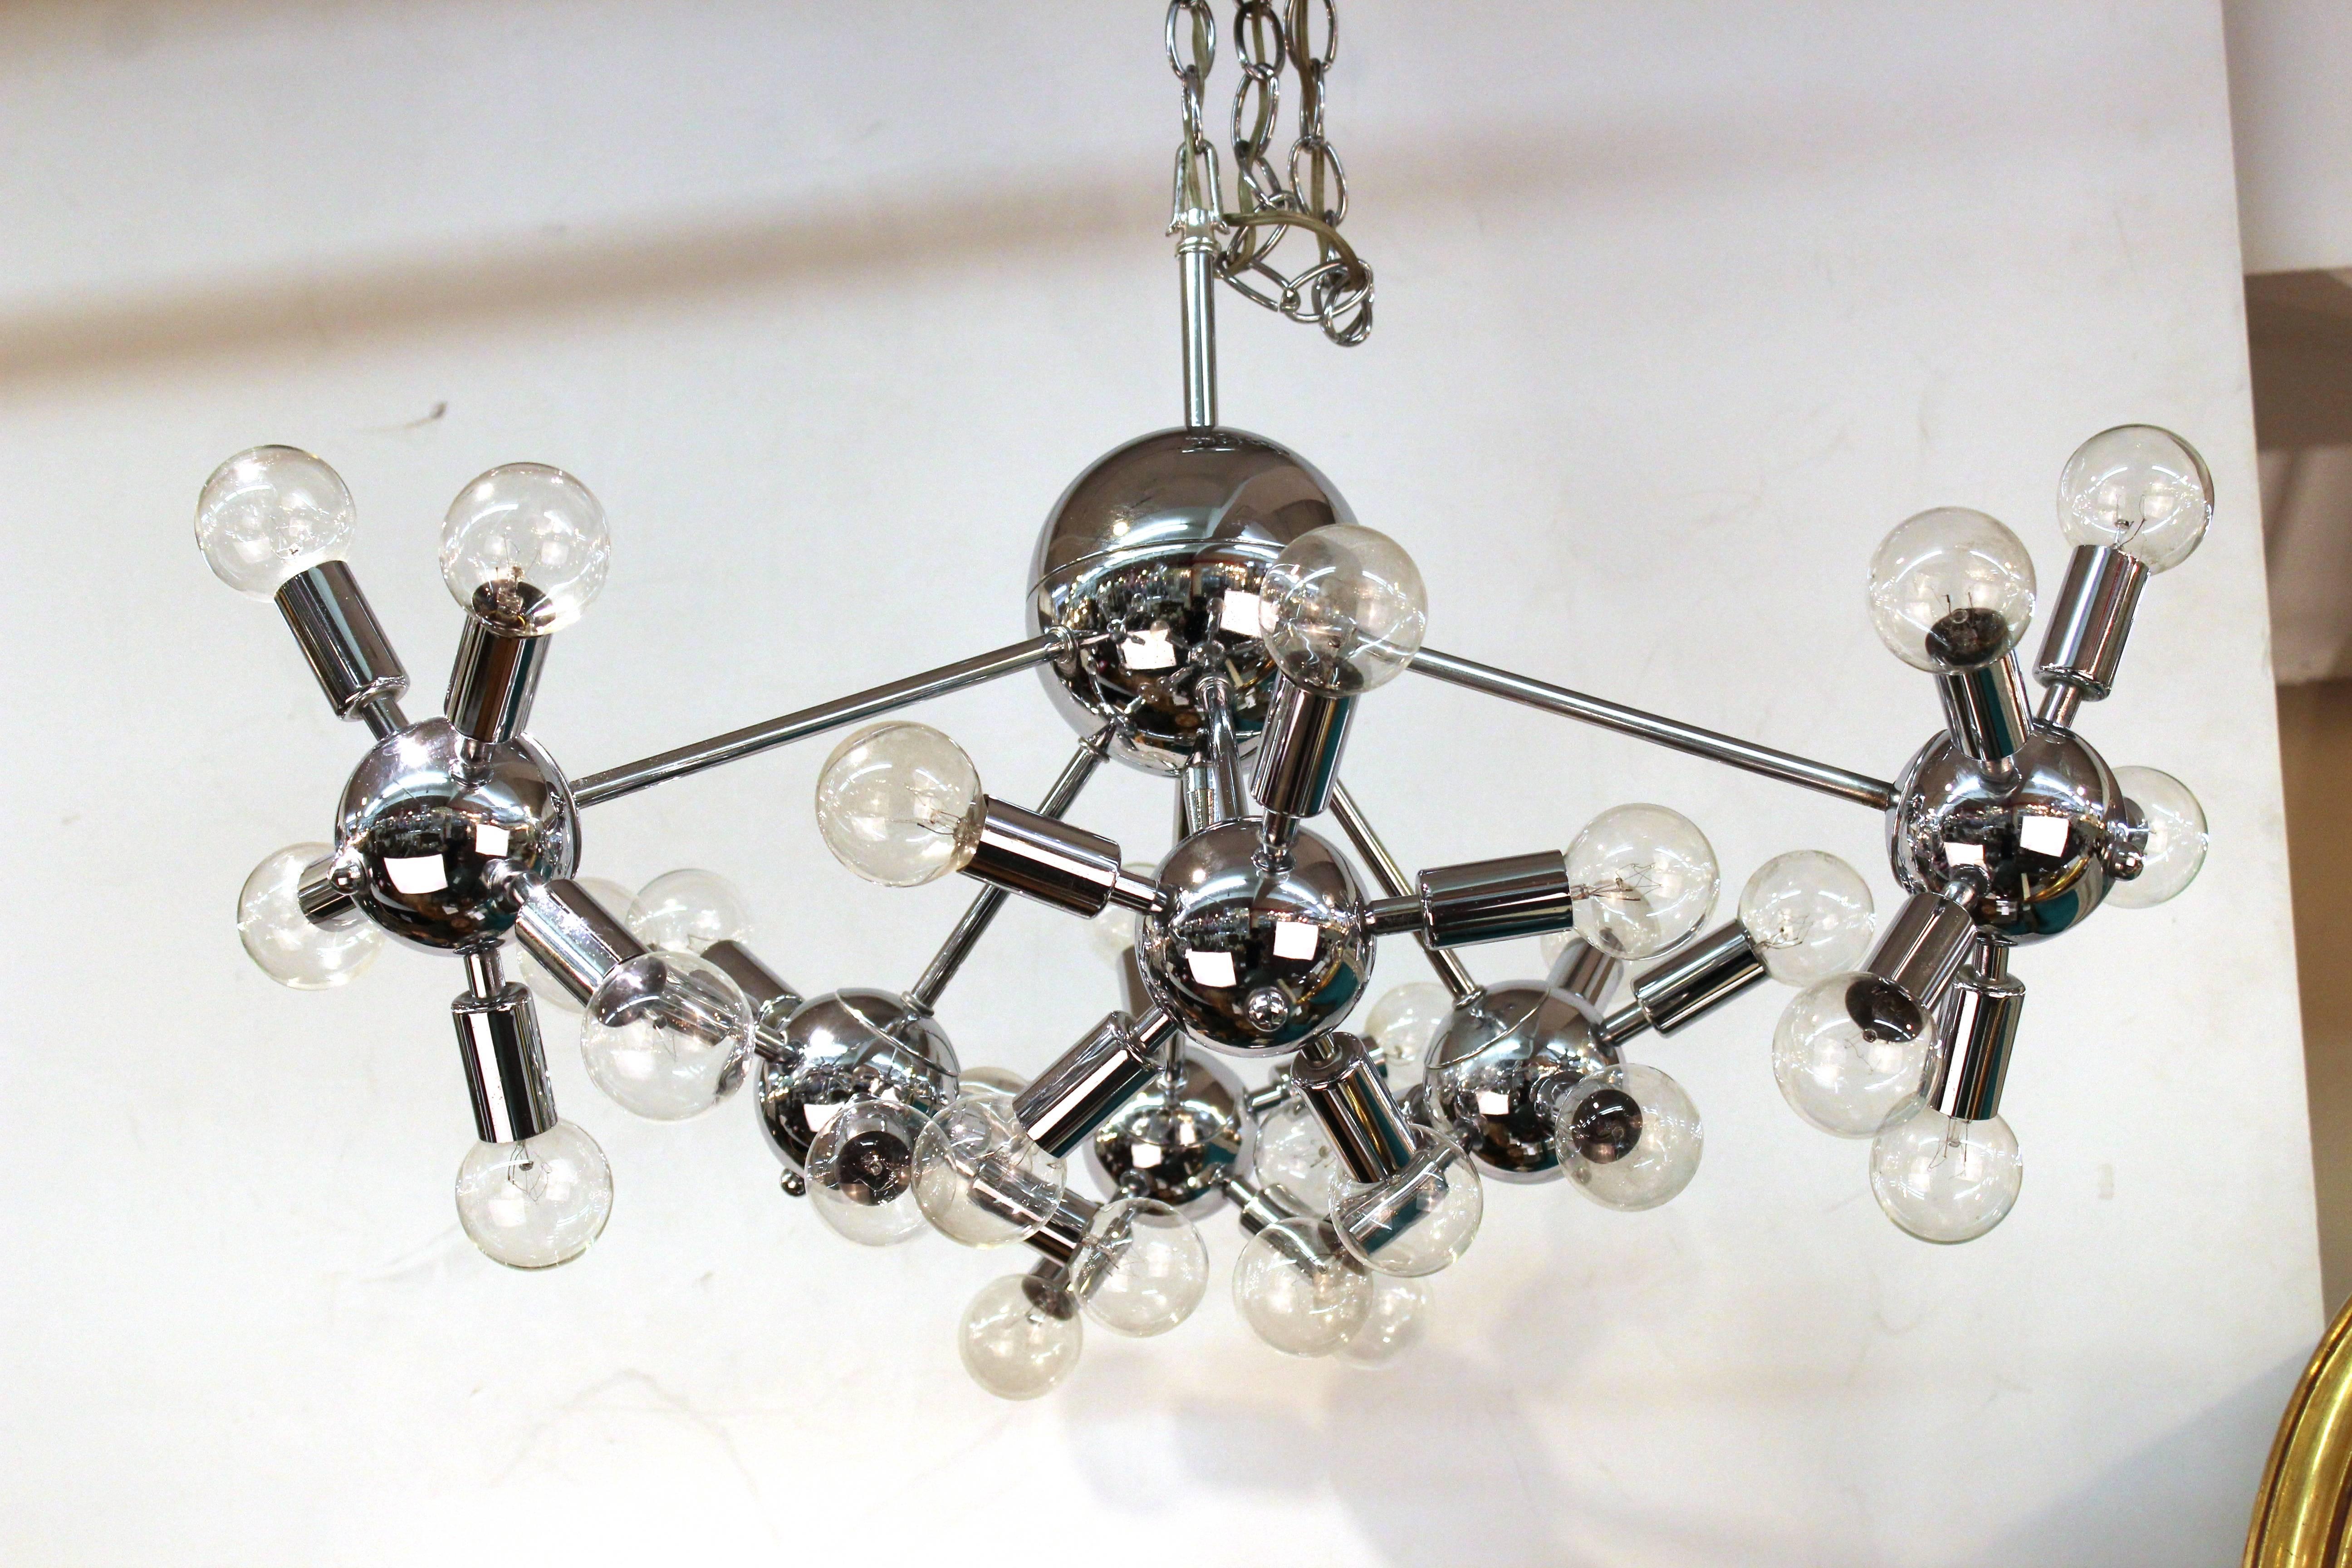 Large Mid-Century Modern chrome Sputnik chandelier, made in Italy during the 1970s. The chandelier has a total of 24 lights and has recently been rewired to fit US standards. In very good vintage condition.